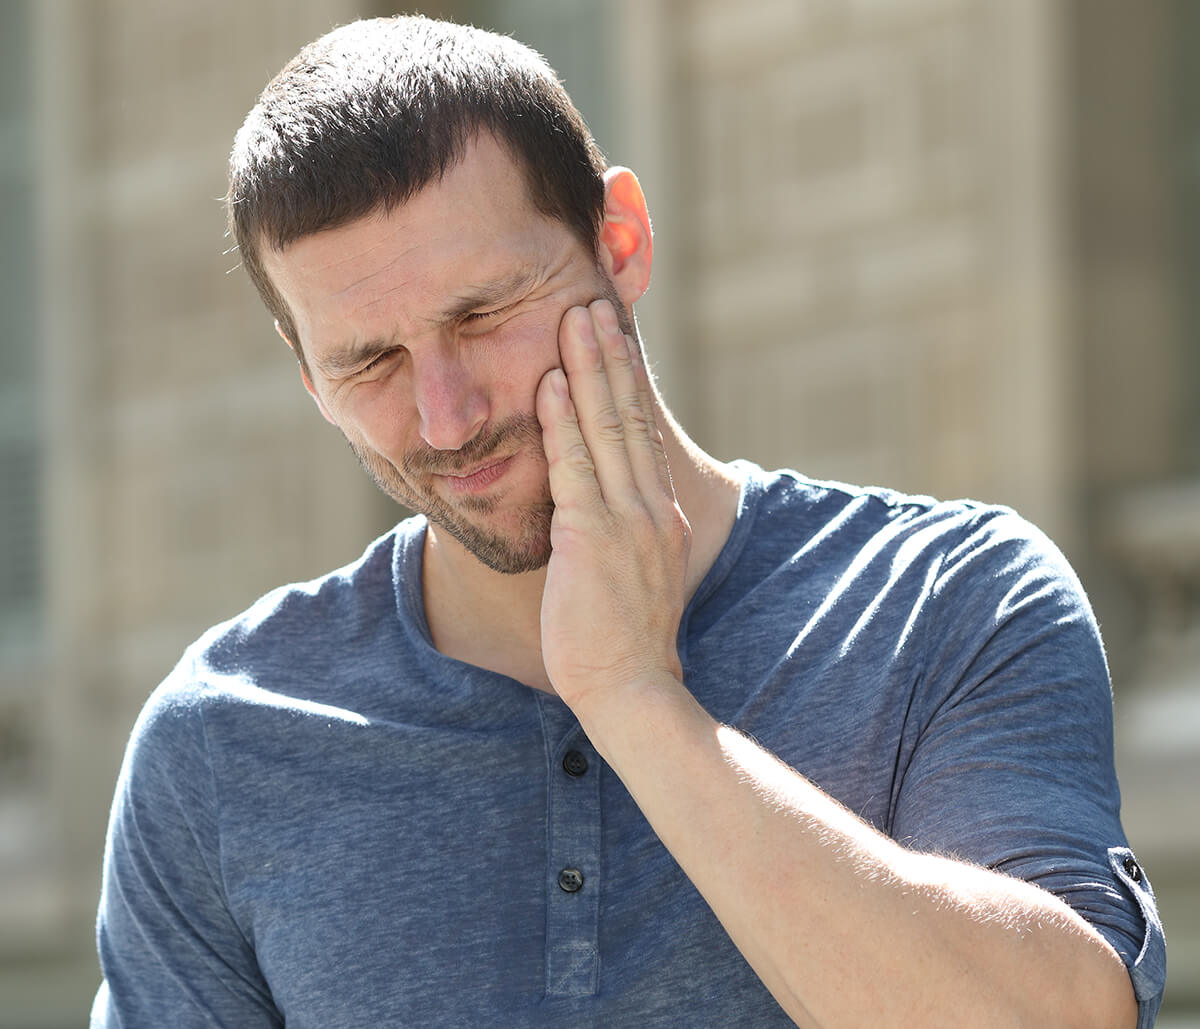 Treatment Options for TMJ Disorder in Kirkland Wa Area